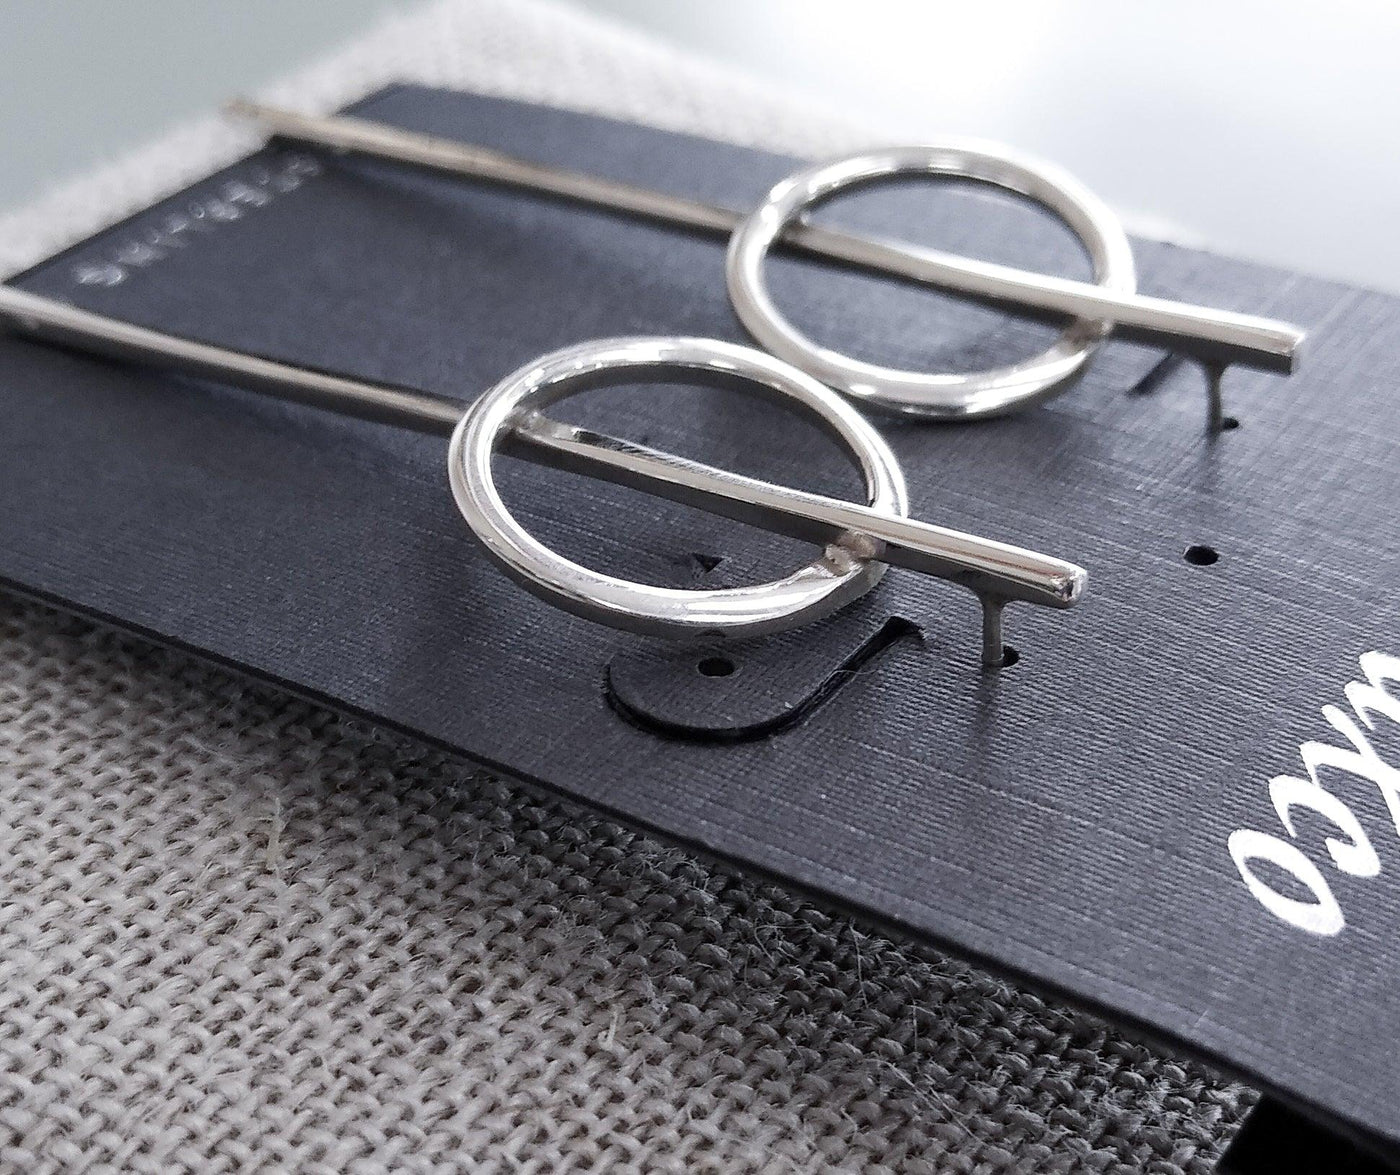 Side angle of the sterling earrings. A long, thin silver bar stretches through a circular hoop at the top of the earring.